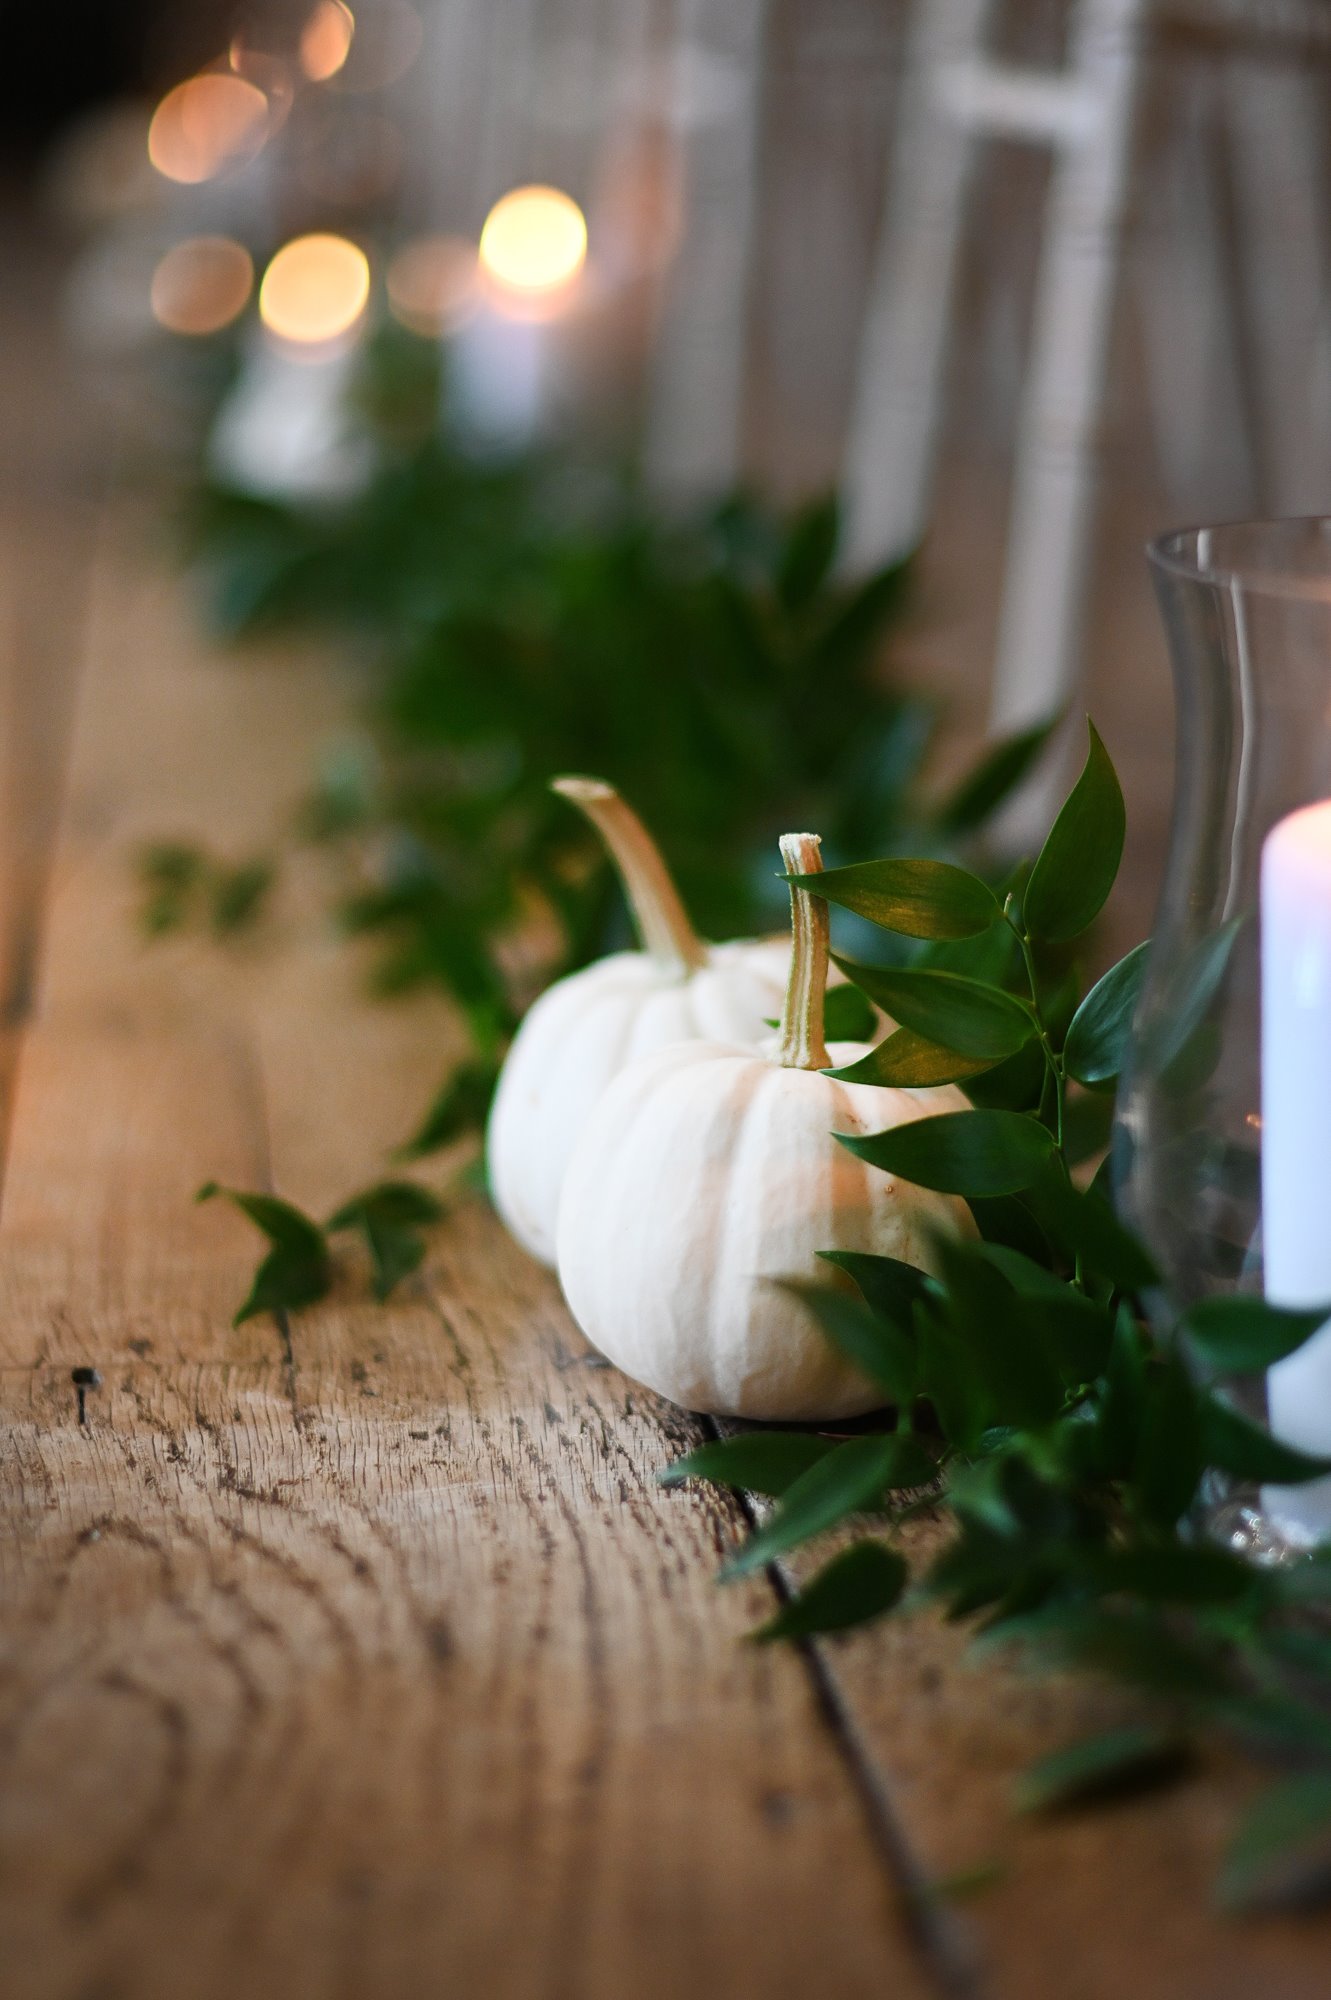 Pumpkin themed wedding for halloween at an old mansion house in Gloucestershire UK